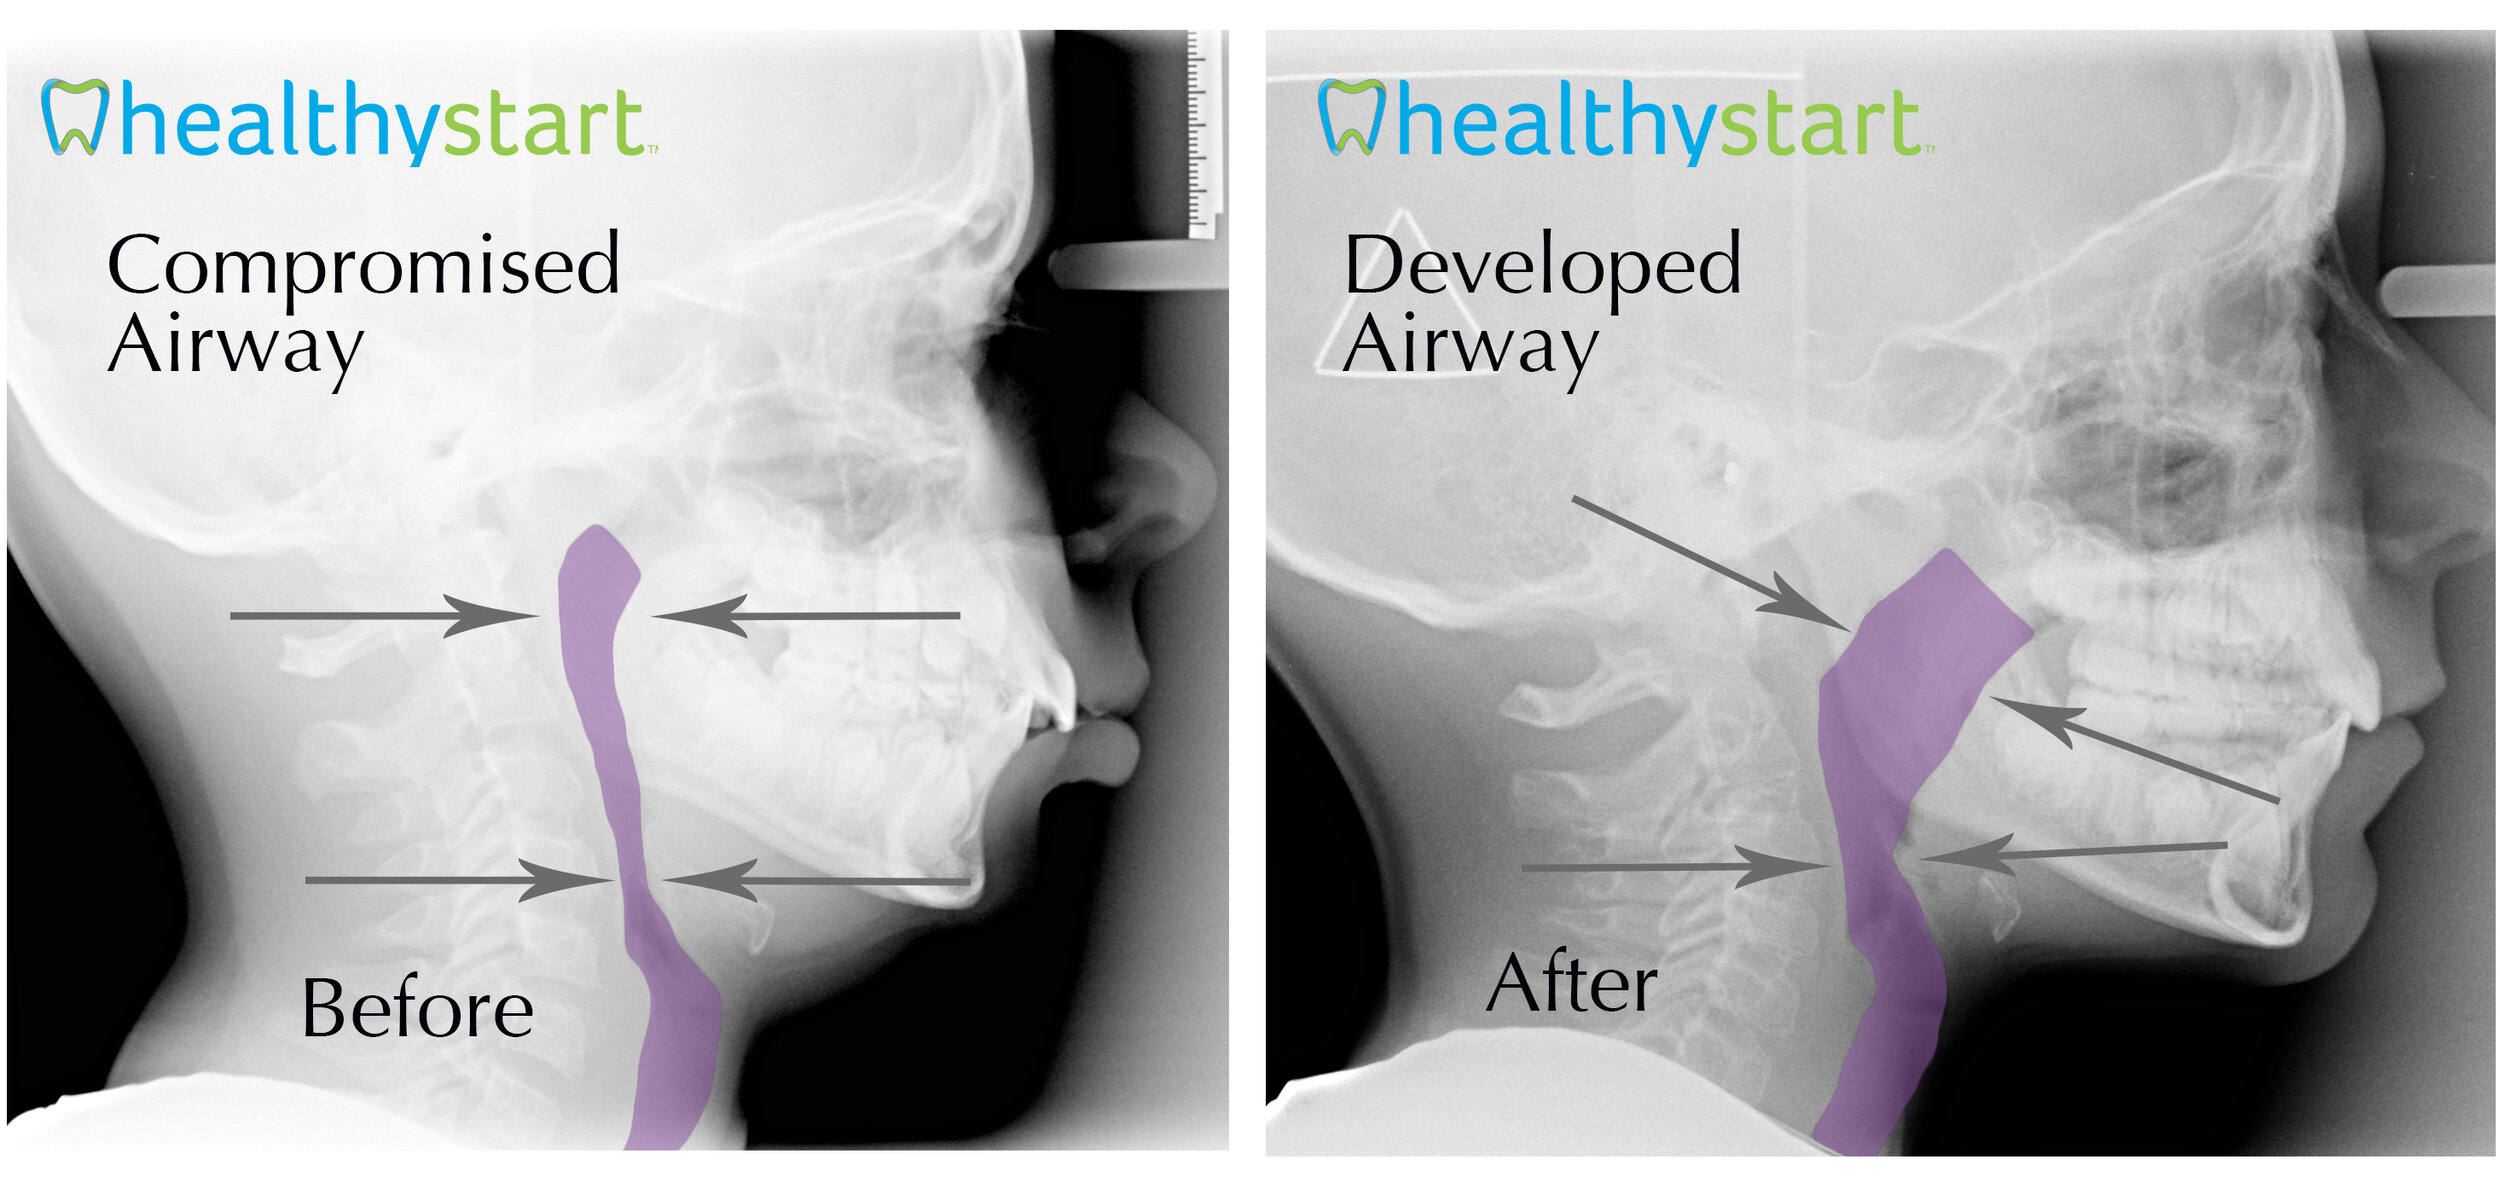 Compromised and Developed Airway.jpg